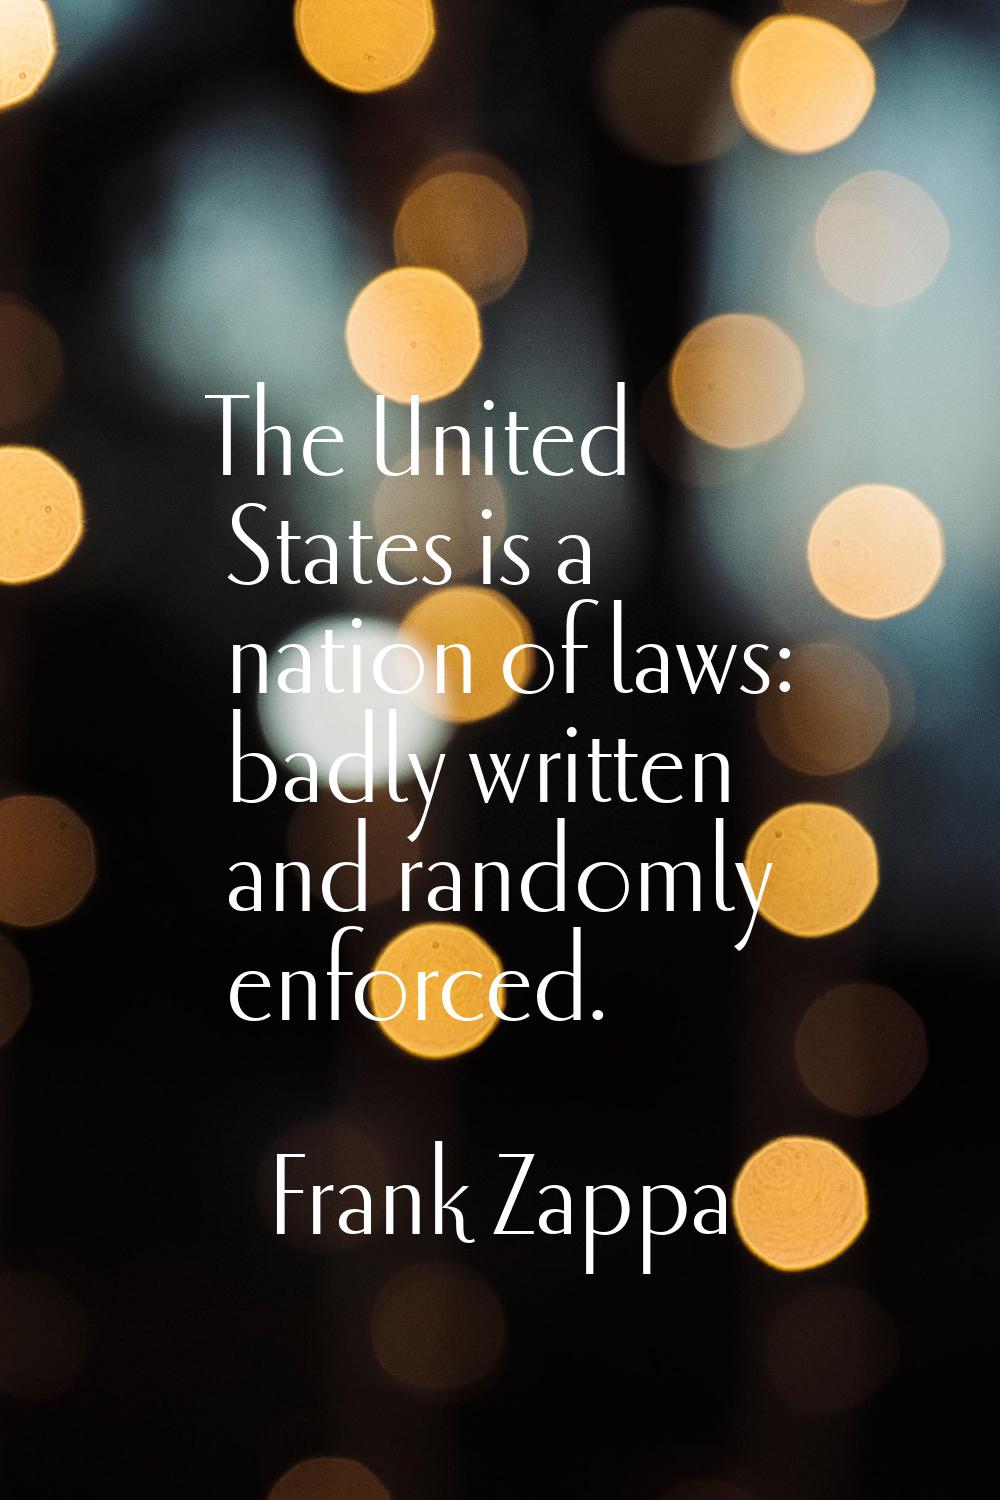 The United States is a nation of laws: badly written and randomly enforced.